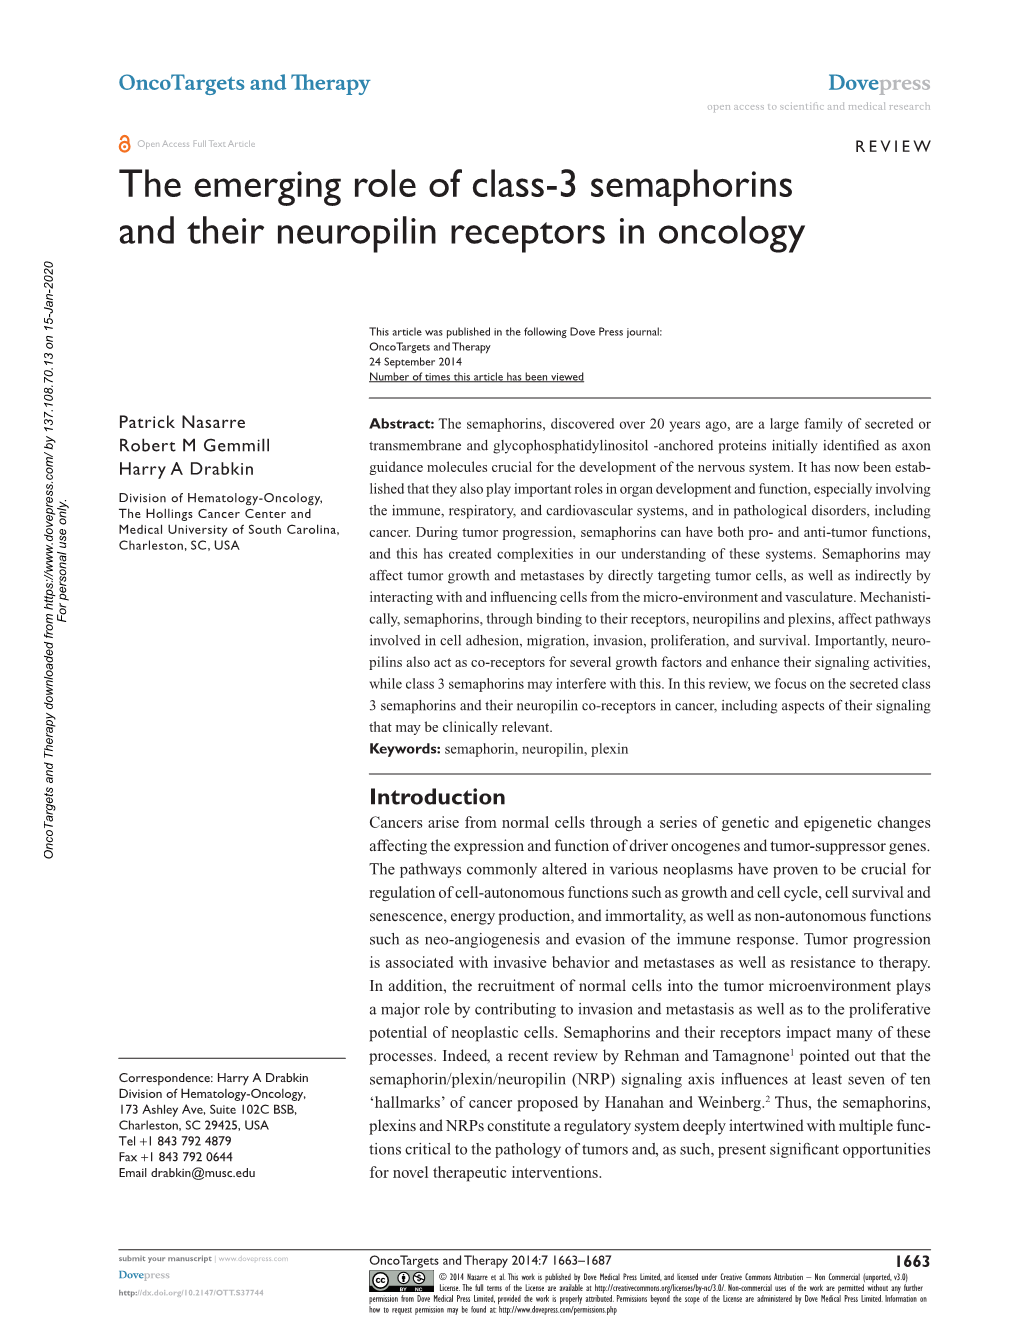 The Emerging Role of Class-3 Semaphorins and Their Neuropilin Receptors in Oncology